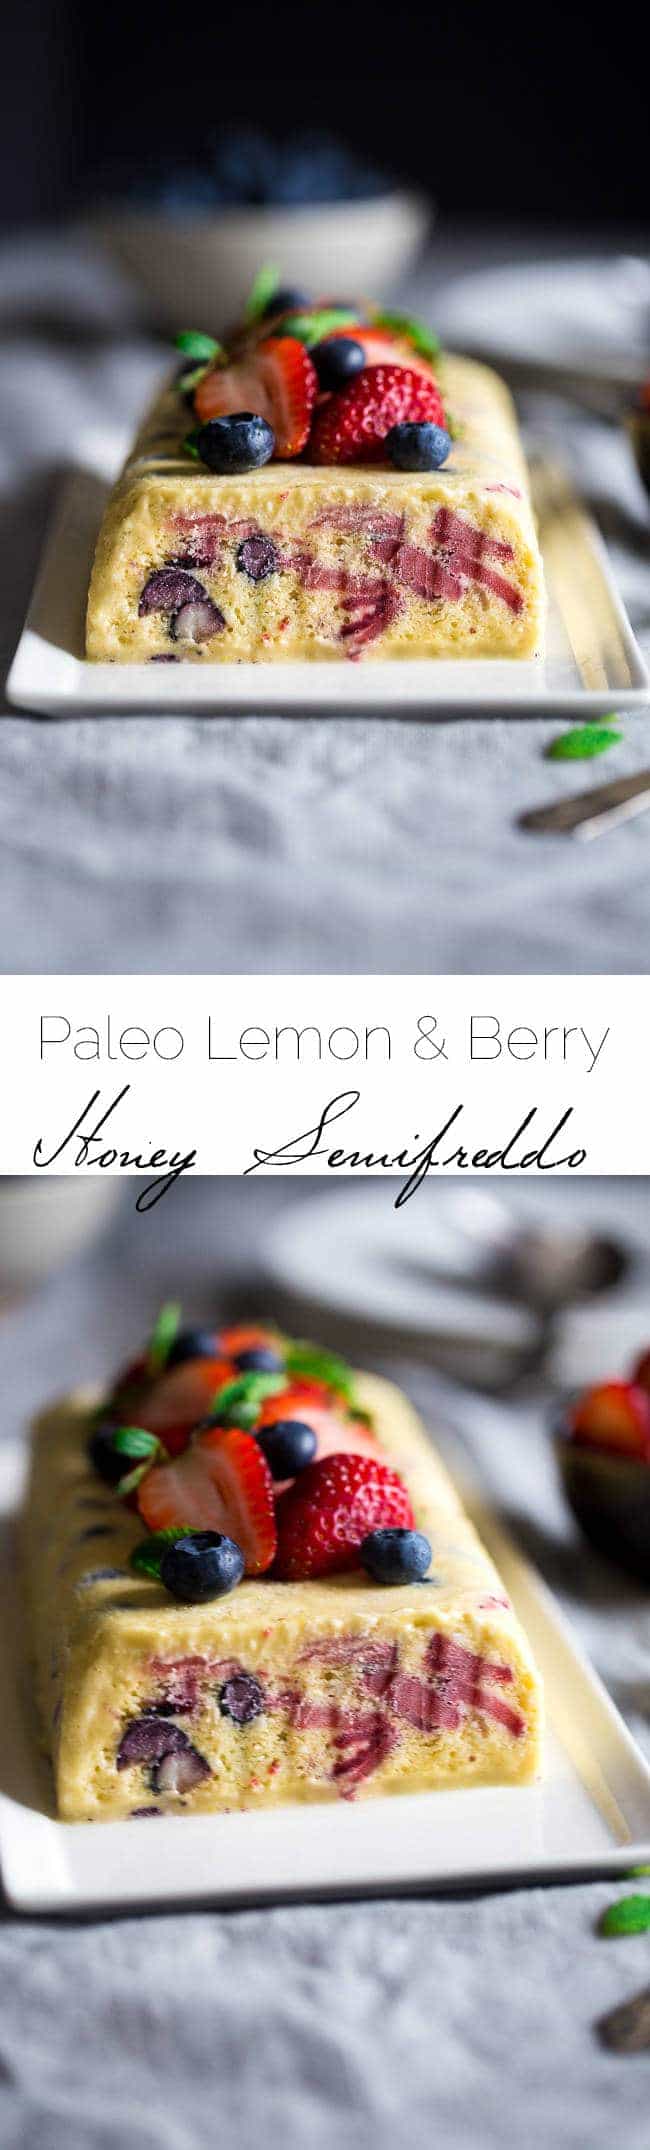 Paleo Red, White and Blueberry Lemon Honey Semifreddo Recipe - This frozen, mousse-like dessert uses honey and coconut milk to make it healthy, and only 160 calories a slice! It's loaded with berries and is creamy and refreshing! Perfect for July 4th! | Foodfaithfitness.com | @FoodFaithFit